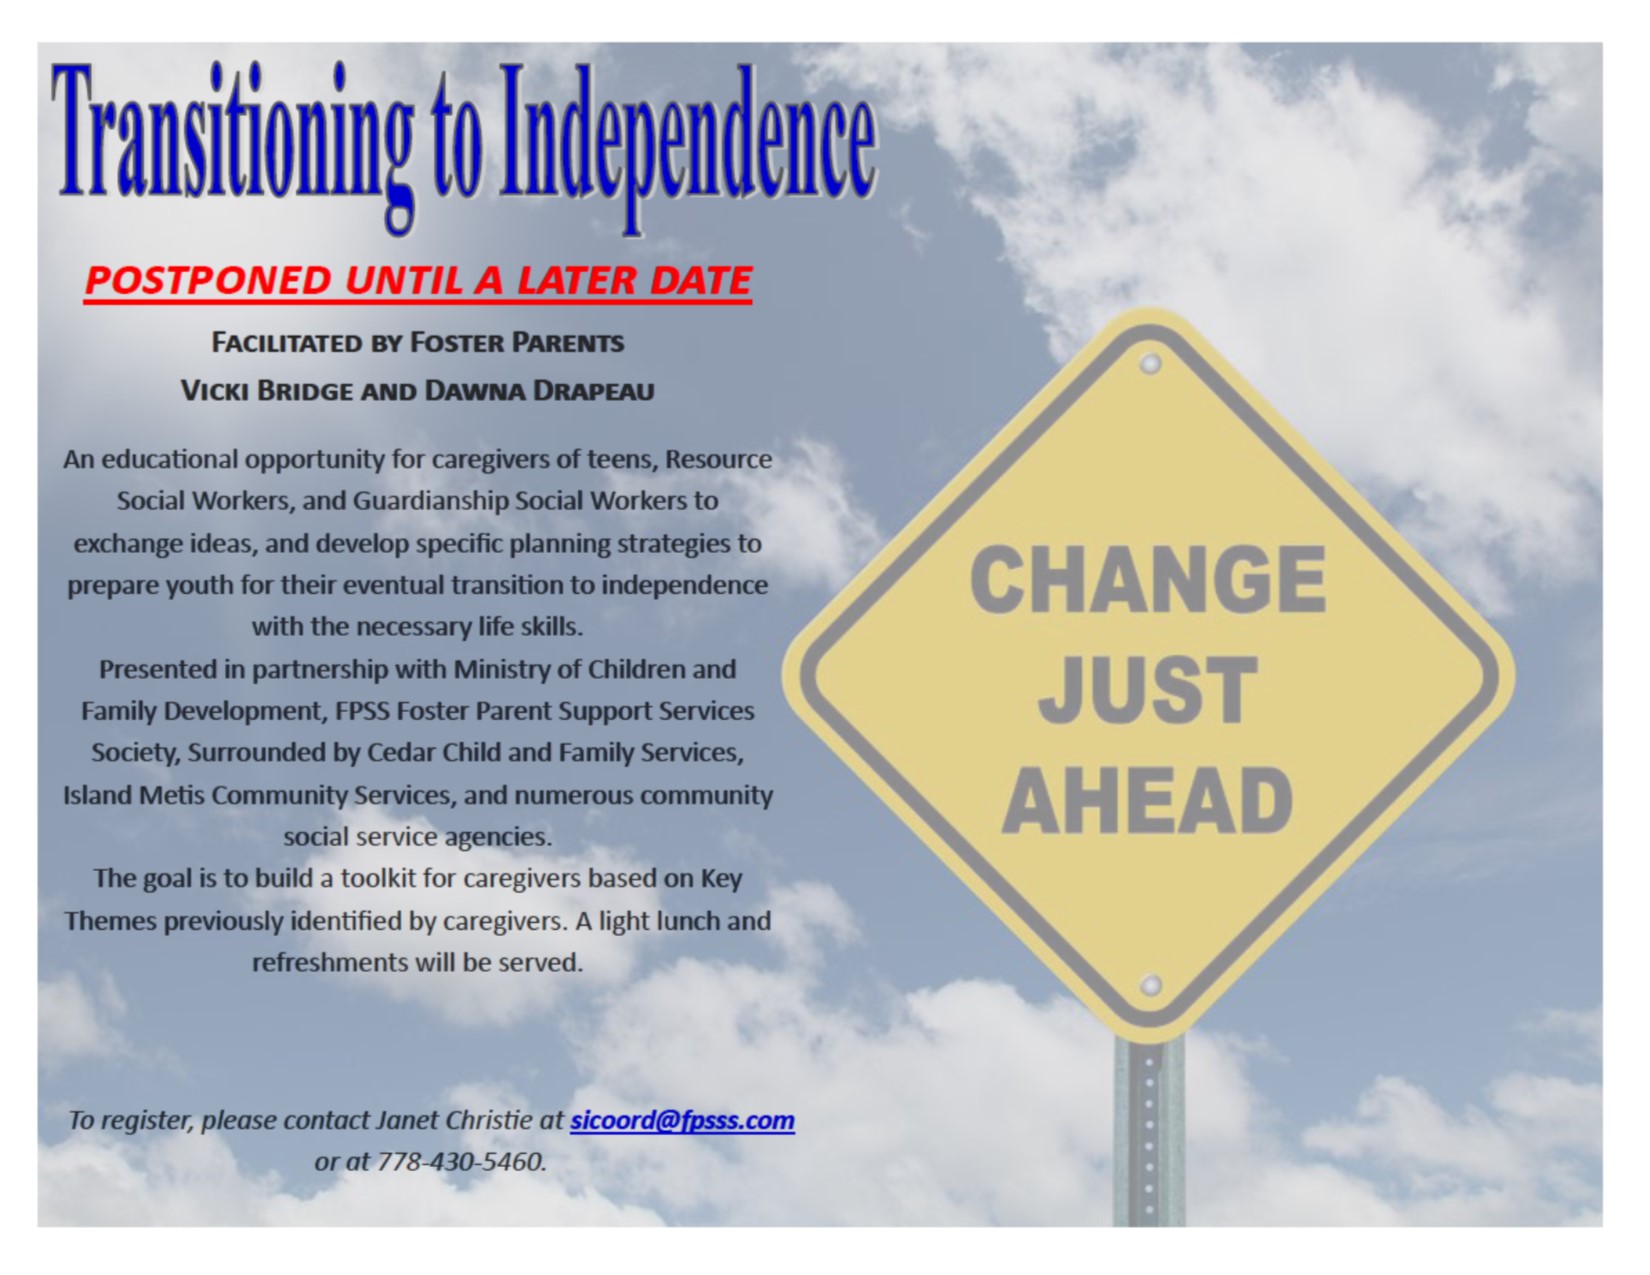 Transitioning to Independence workshop -postponed until a later date